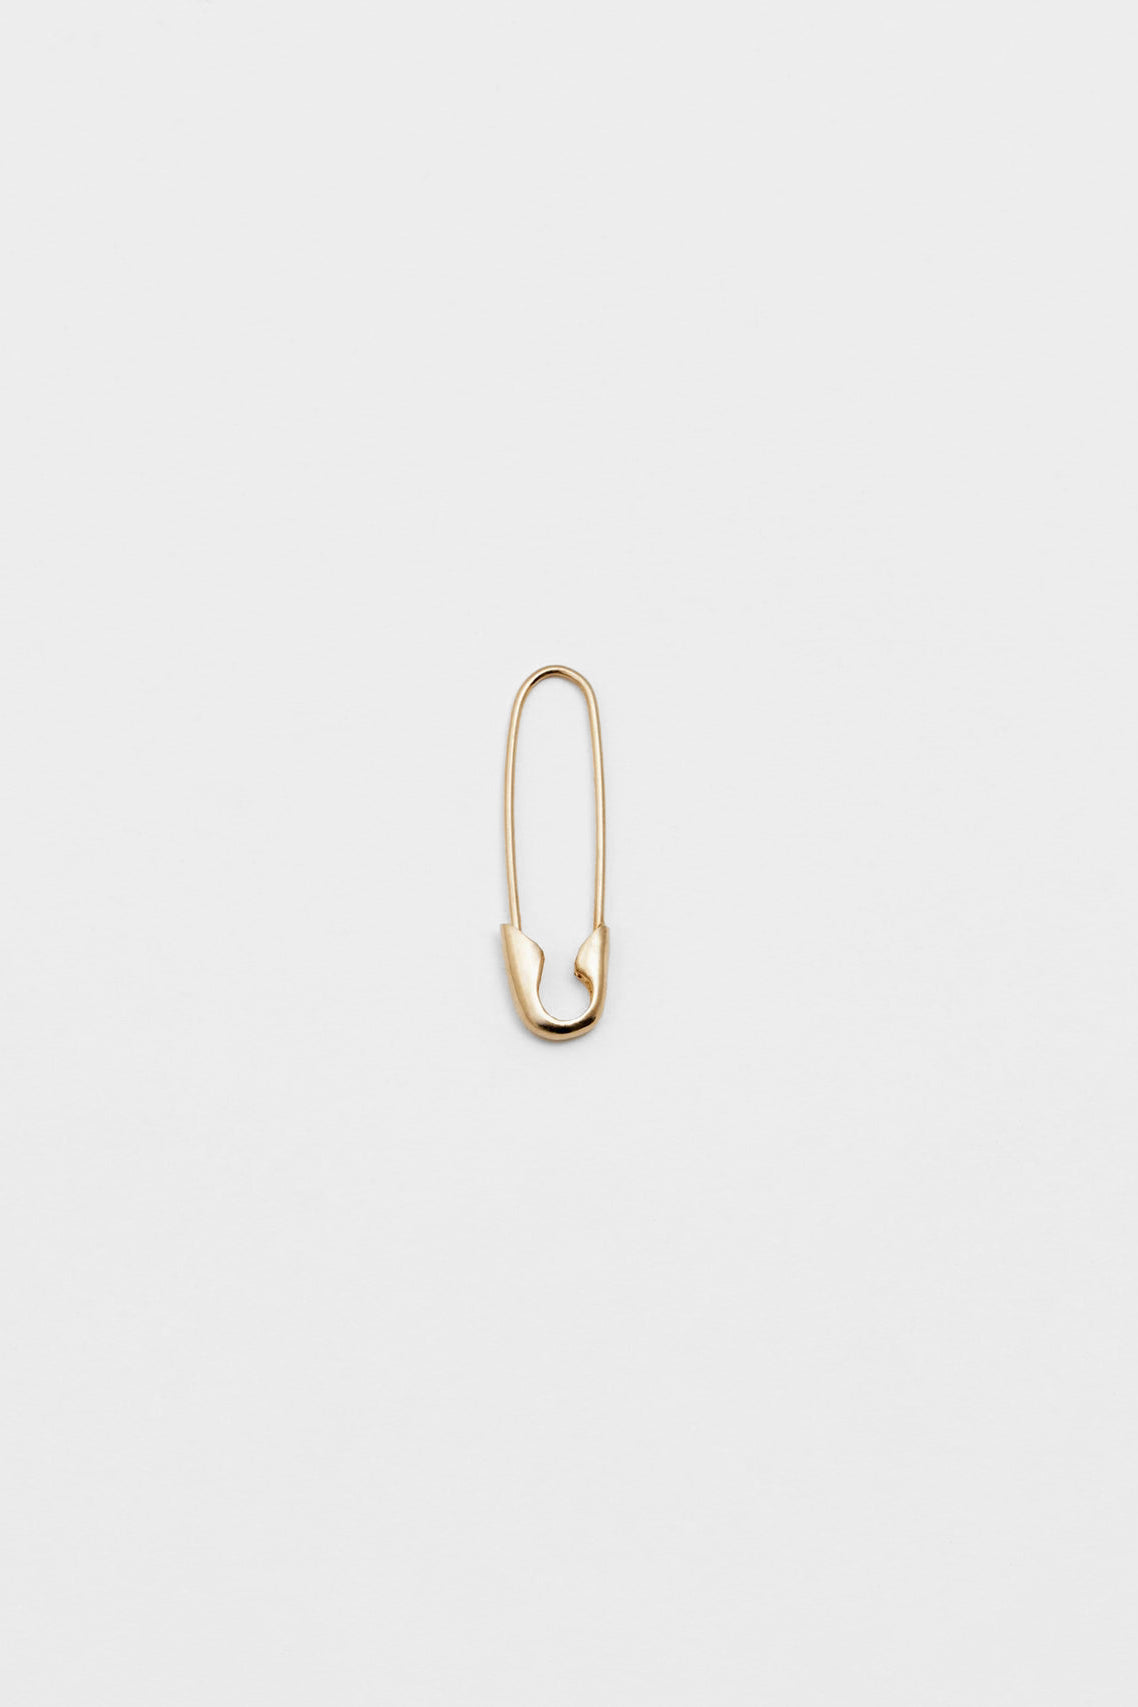 Safety Pin Earring in 14k Yellow Gold